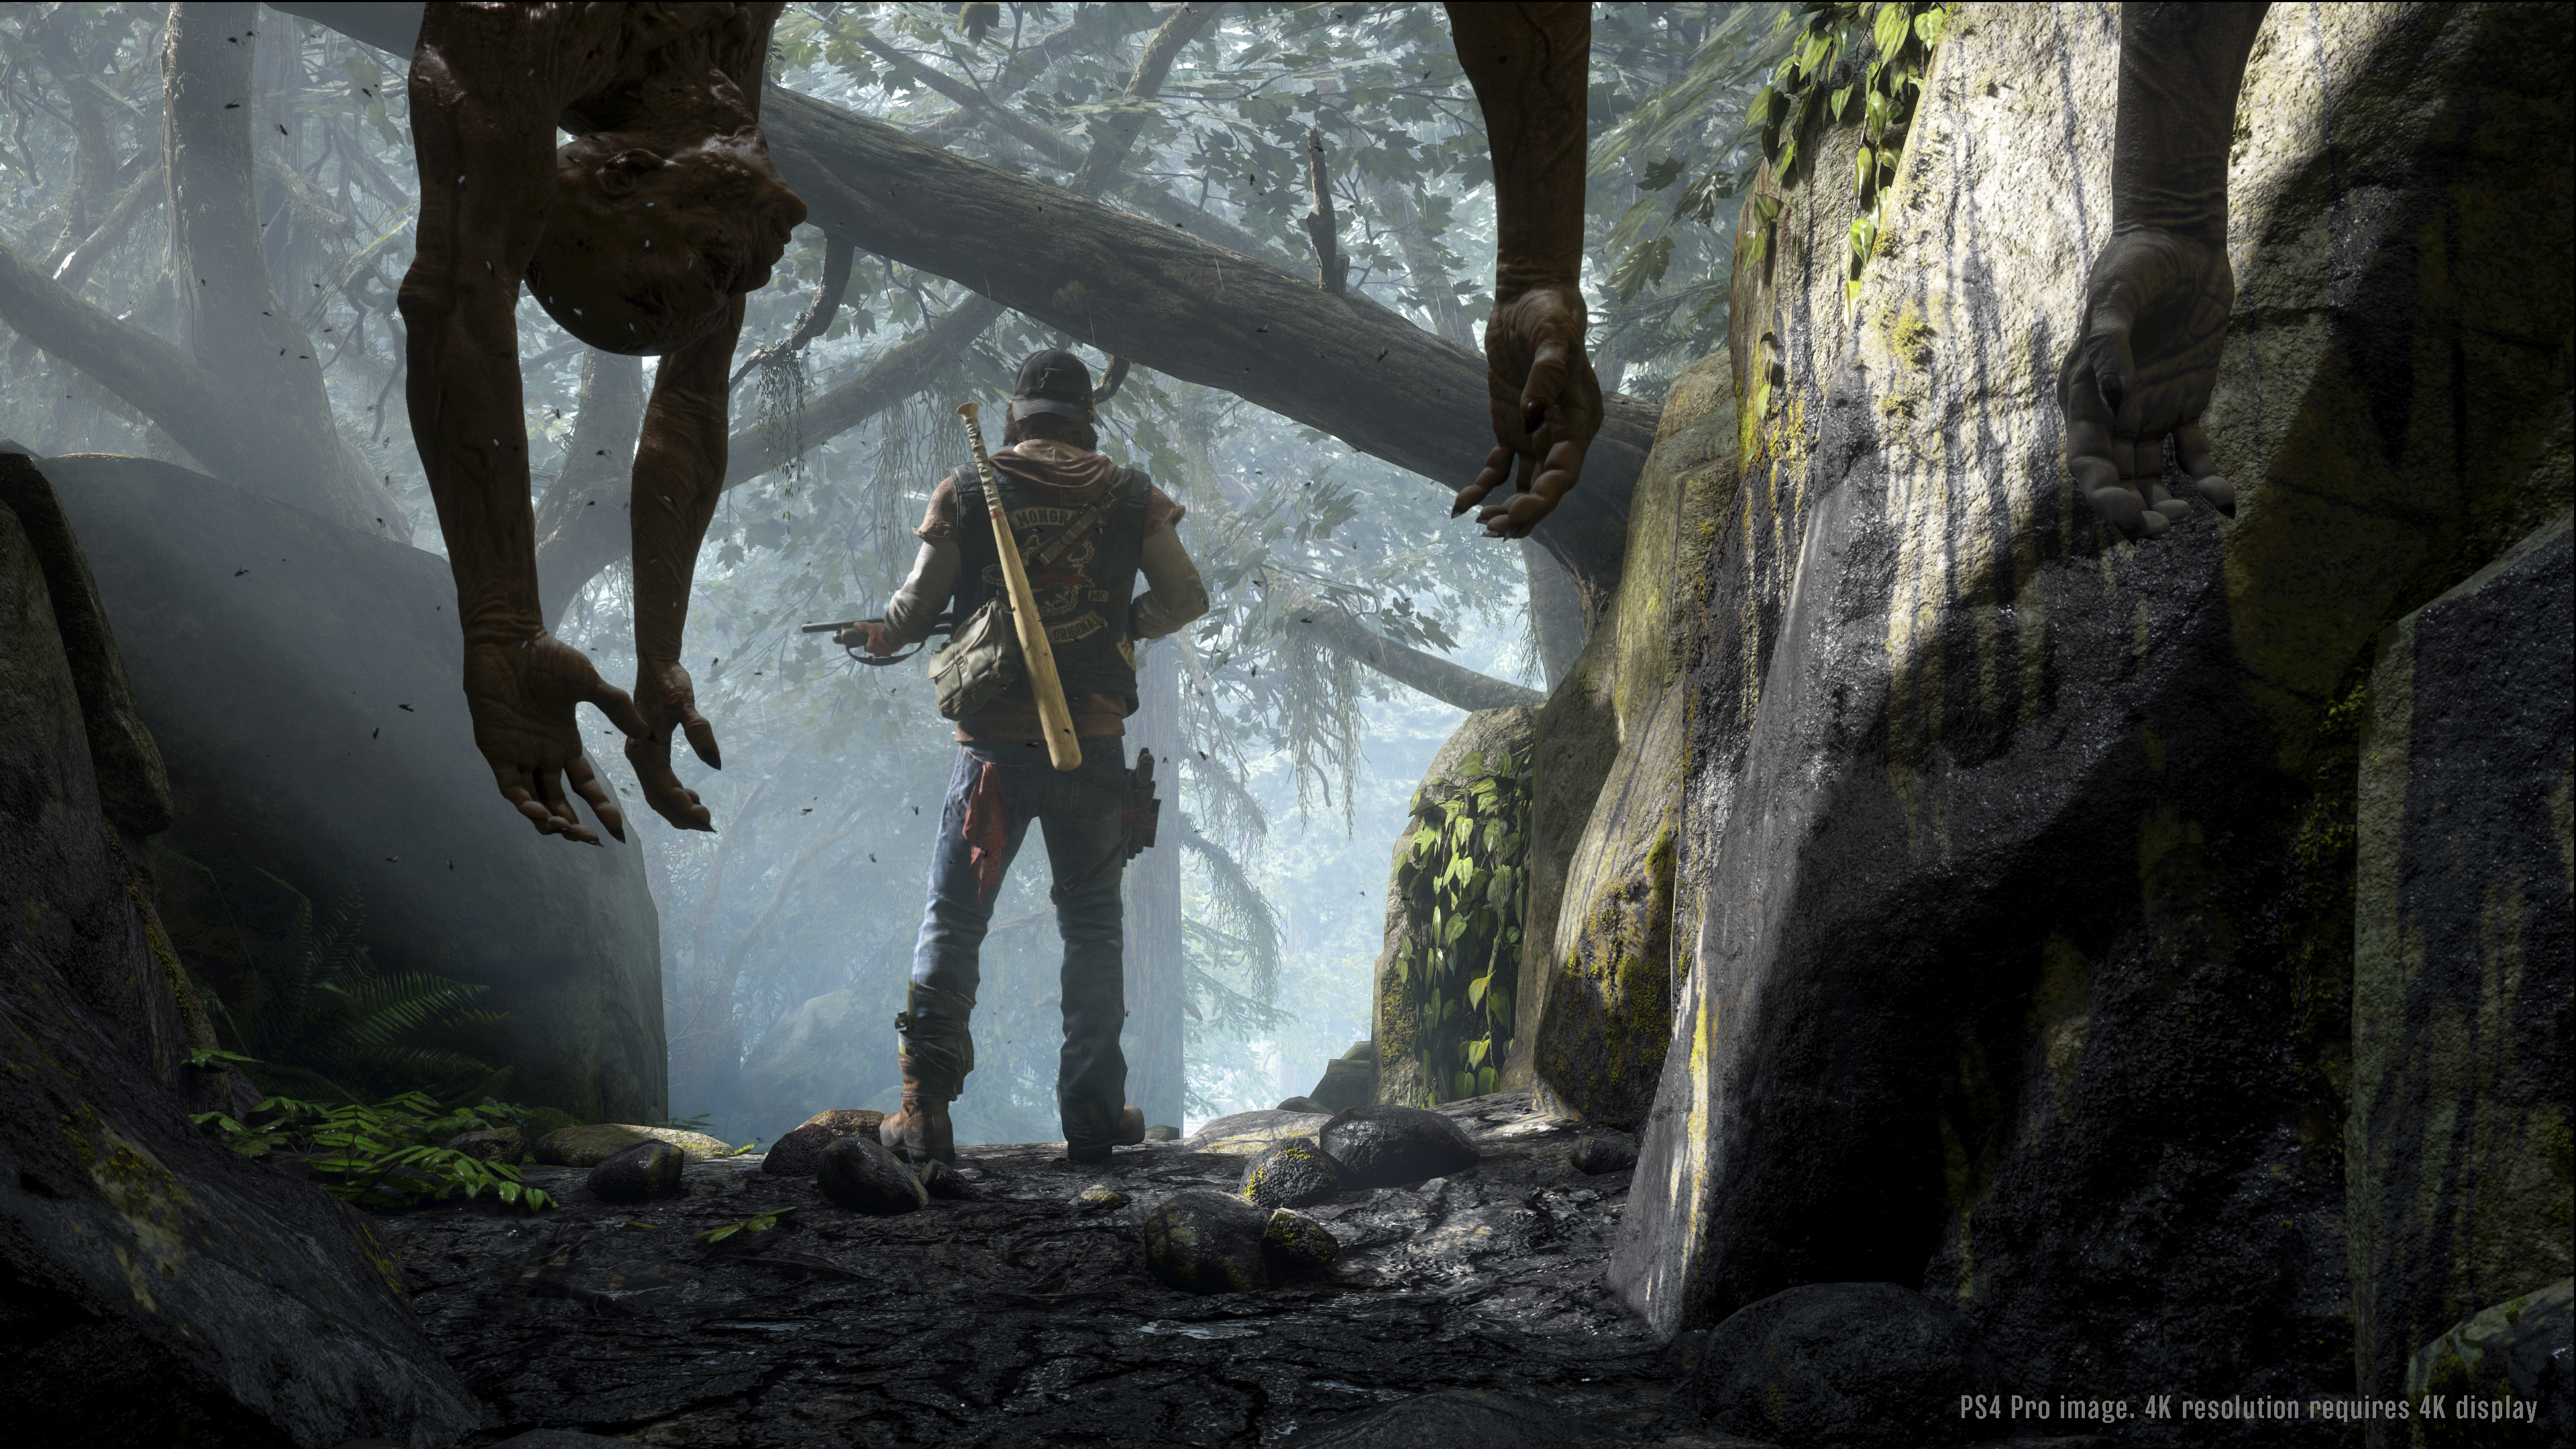 Days Gone gameplay screenshot featuring main character Deacon St. John standing in a misty forest with corpses hanging in the foreground.